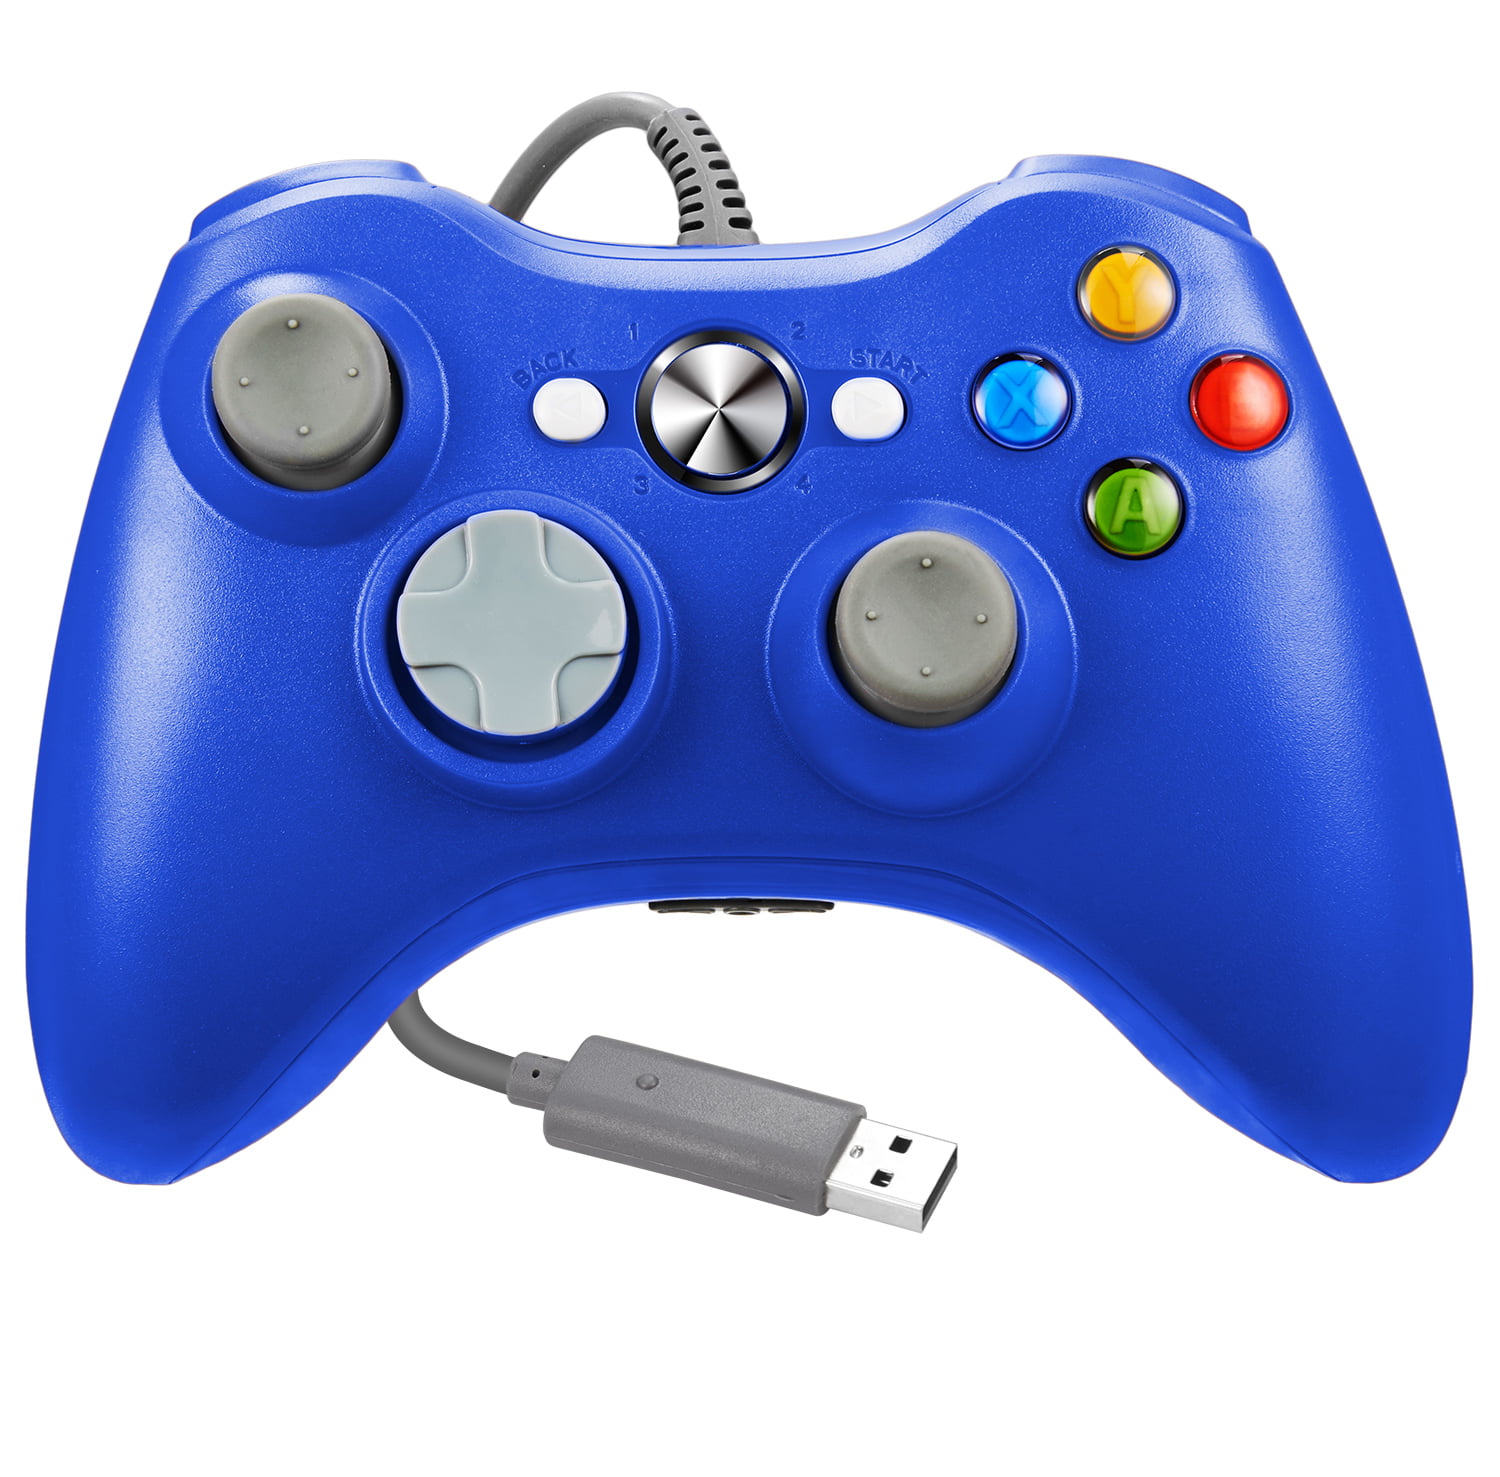 LUXMO Xbox 360 Wired Controlle with Shoulders Buttons for Xbox 360/Xbox 360 Slim/PC Windows 7 8 10 Game (Blue)